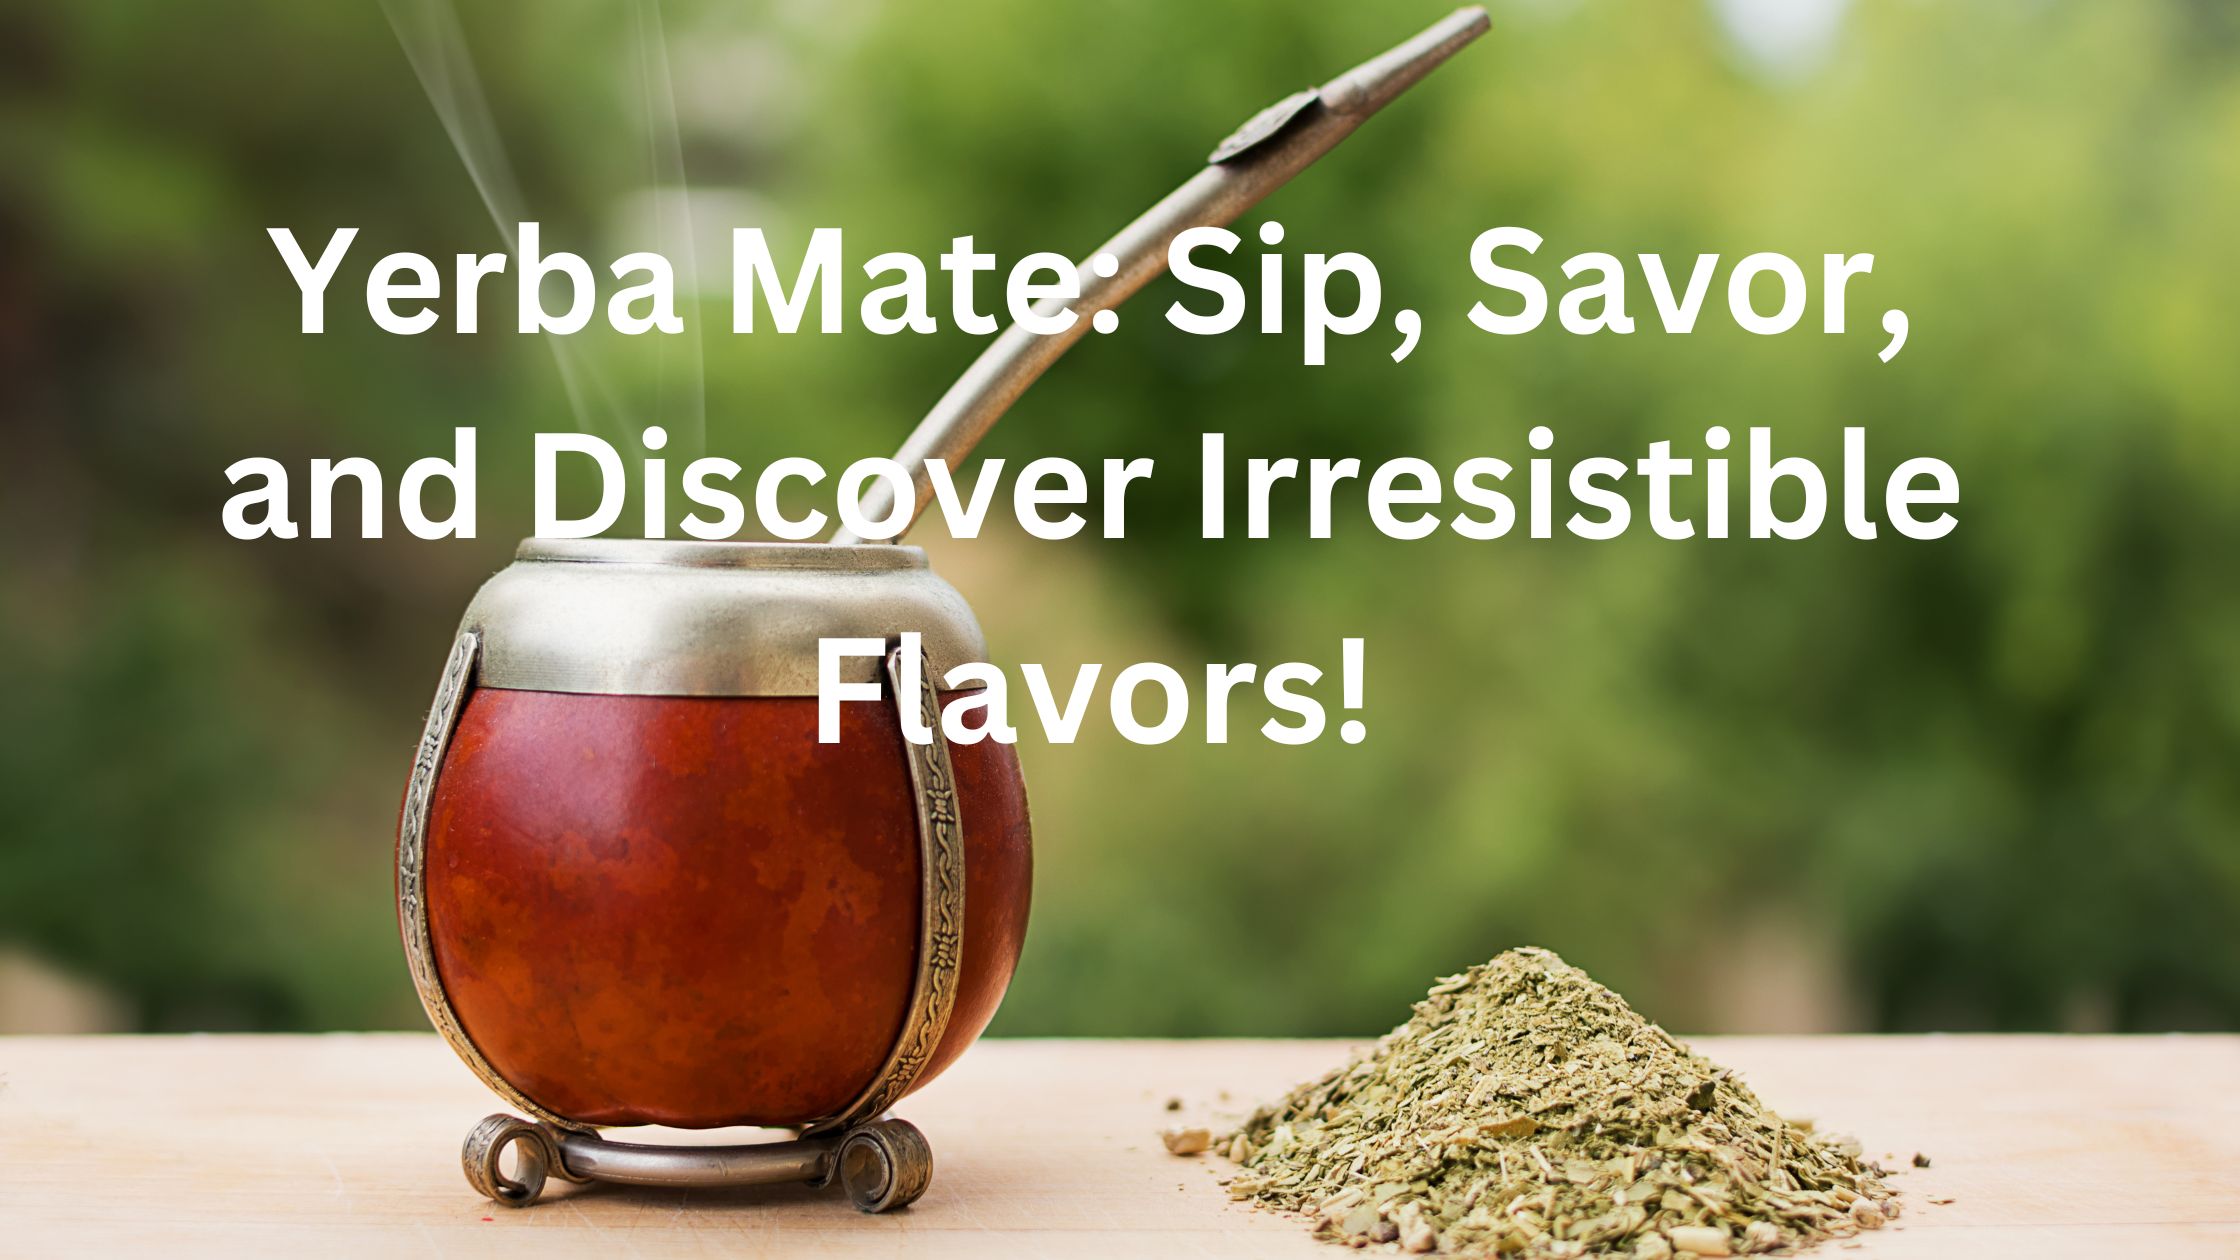 how many yerba mate flavors are there available?